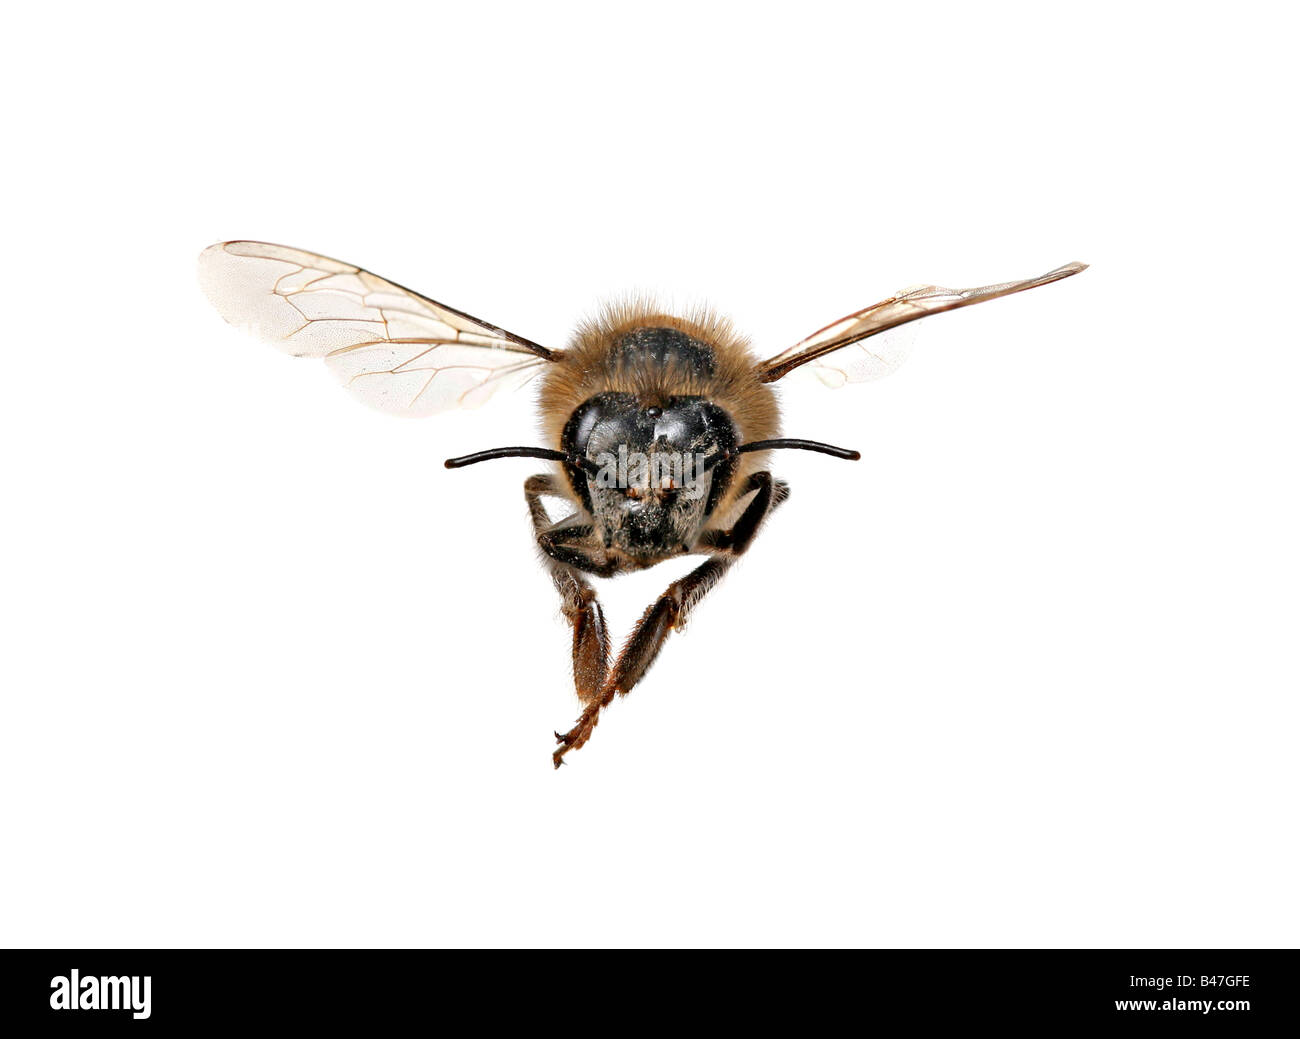 Honey Bee Looking Right At You With Extreme Detail on White Background Stock Photo